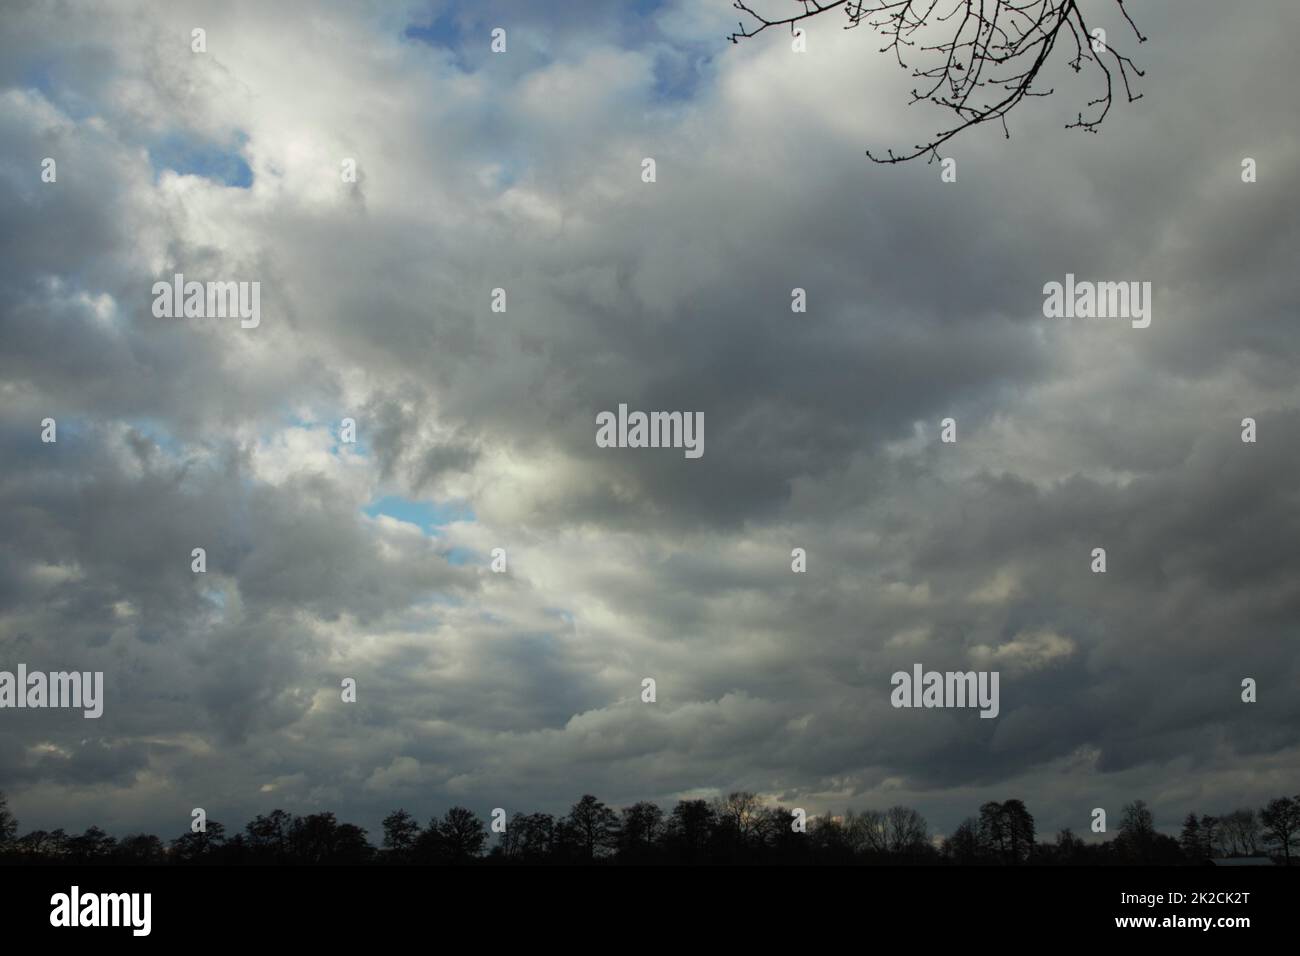 Dramatic sky with big clouds on a stormy day Stock Photo